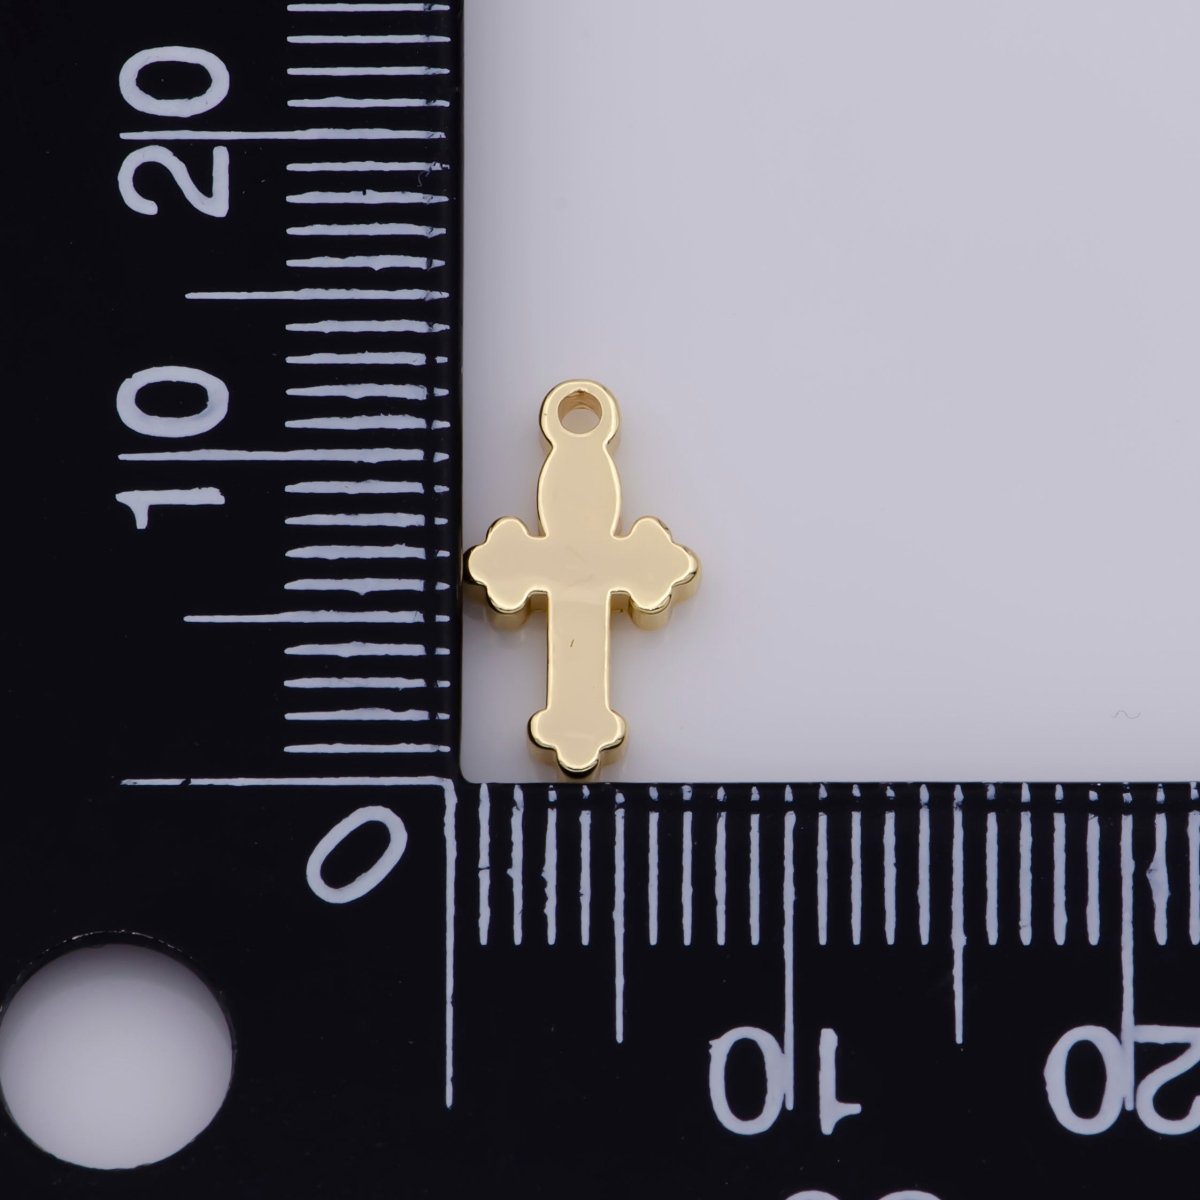 OS Mini Cross charm 14K Gold Filled Cross Tiny Cross charm Mininiatur cross for religious jewelry making Rosary Component Earring Necklace - DLUXCA